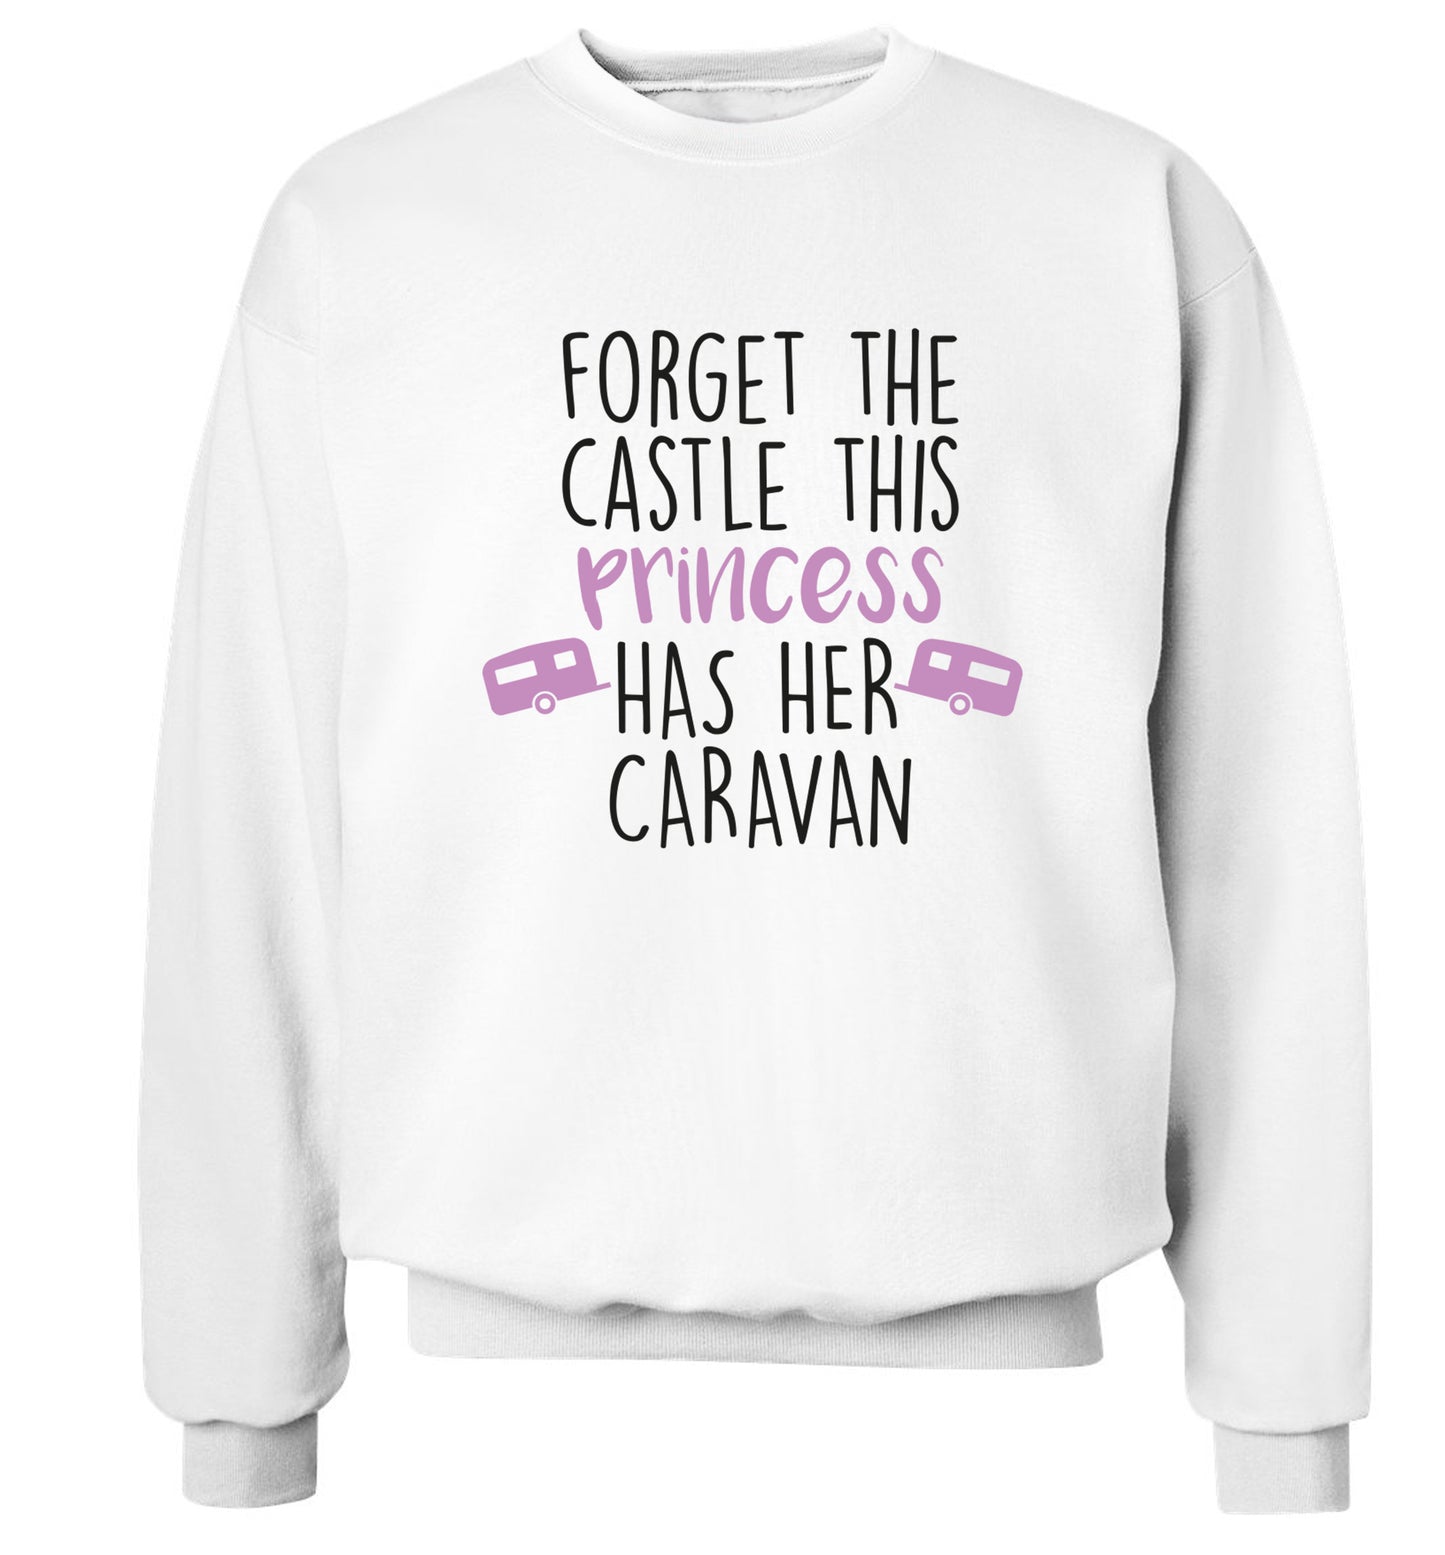 Forget the castle this princess lives at the caravan Adult's unisex white Sweater 2XL